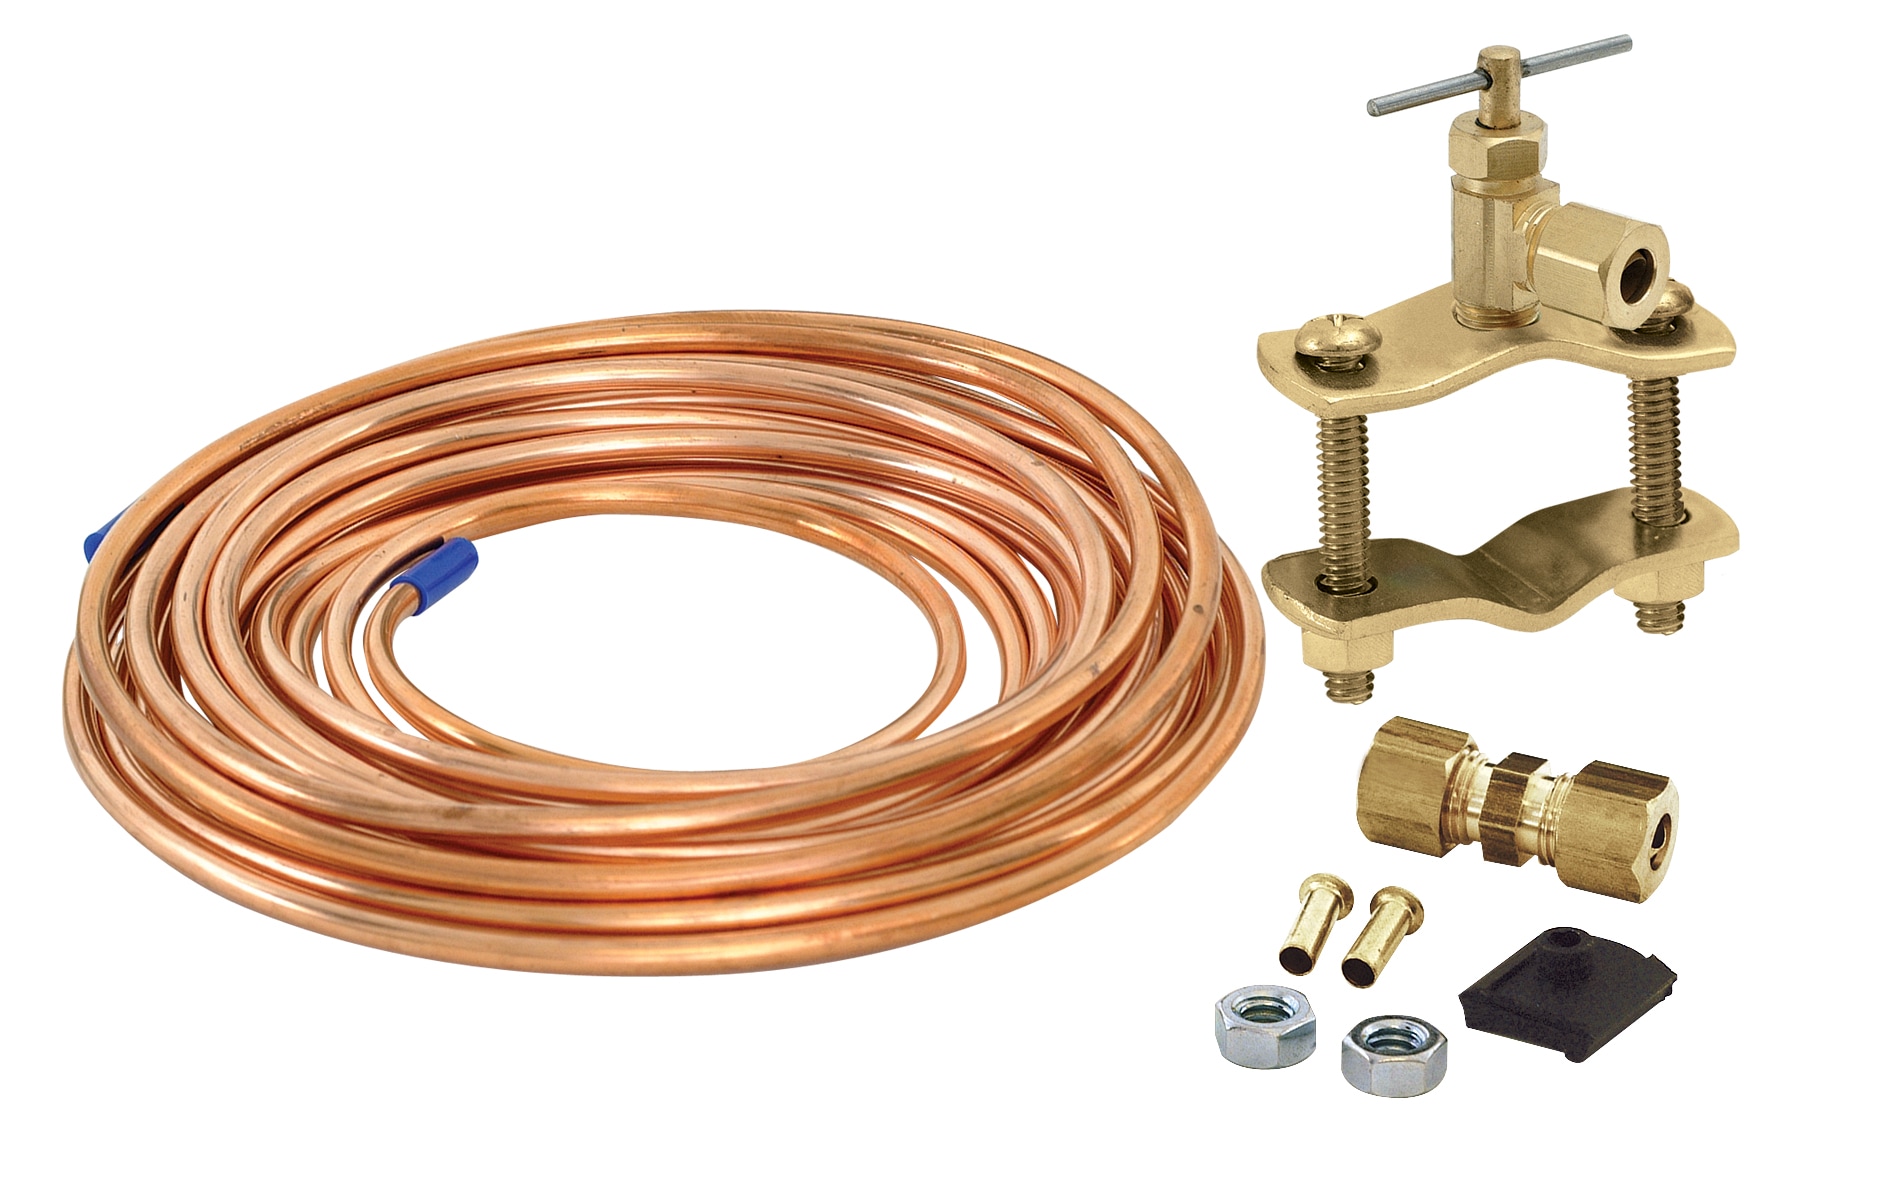 EASTMAN 15-ft 1/4-in OD Inlet x 1/4-in OD Outlet Copper Ice Maker  Installation Kit at